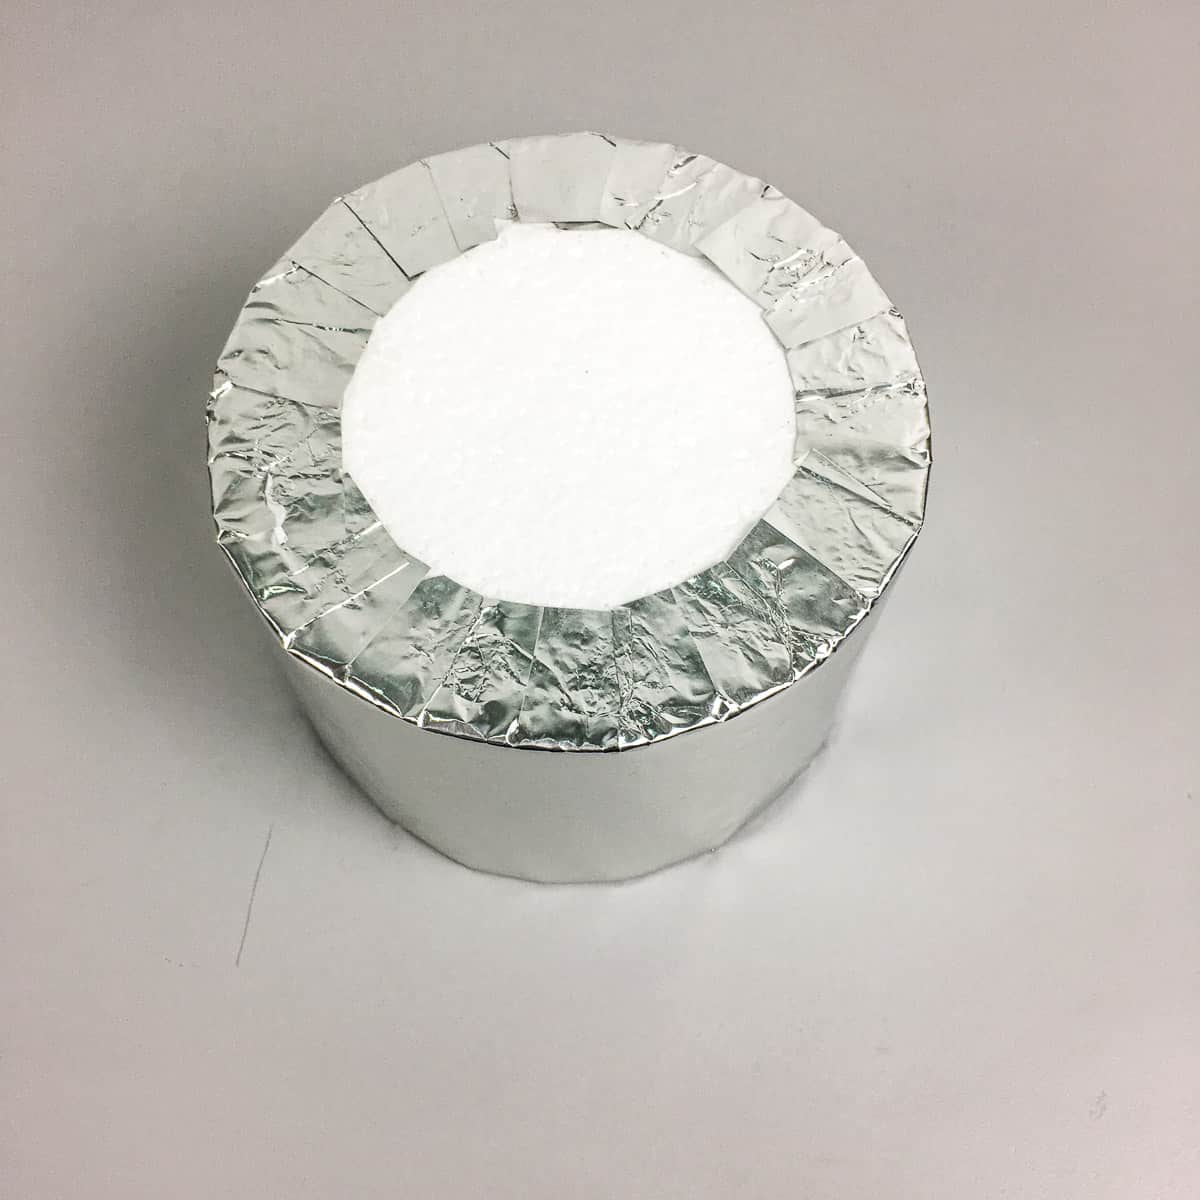 A round styrofoam block wrapped in silver paper